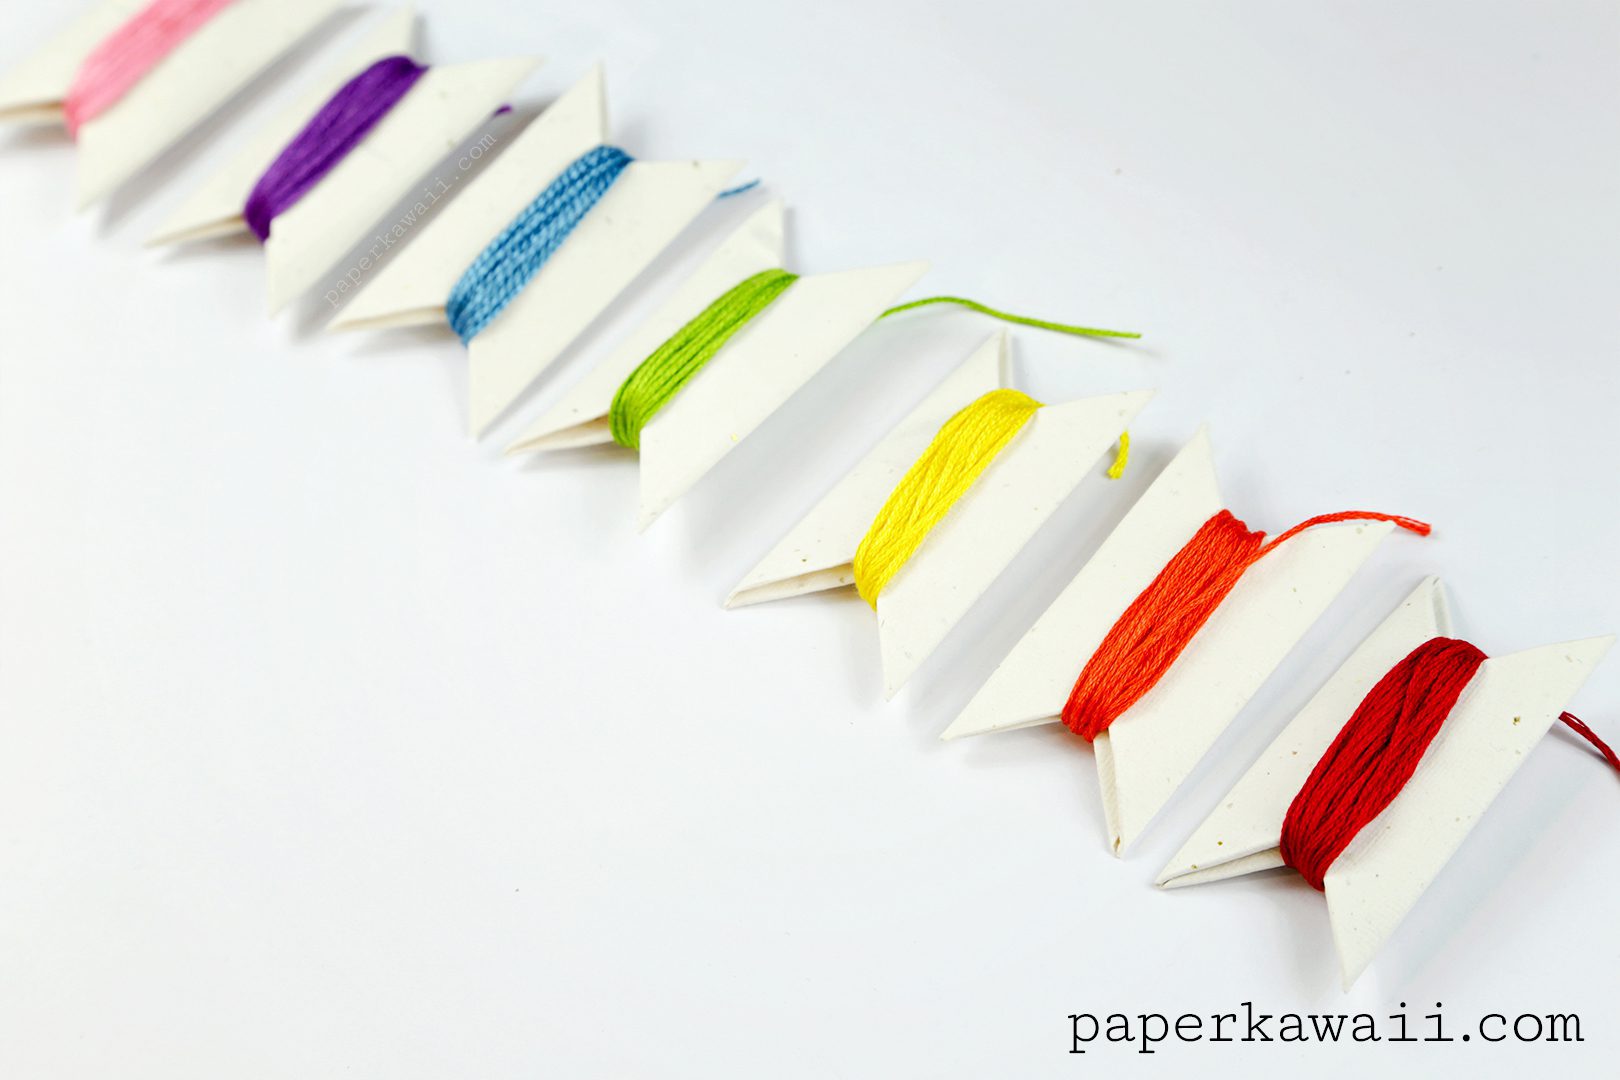 Origami Bobbins to Organise your Threads & Ribbons